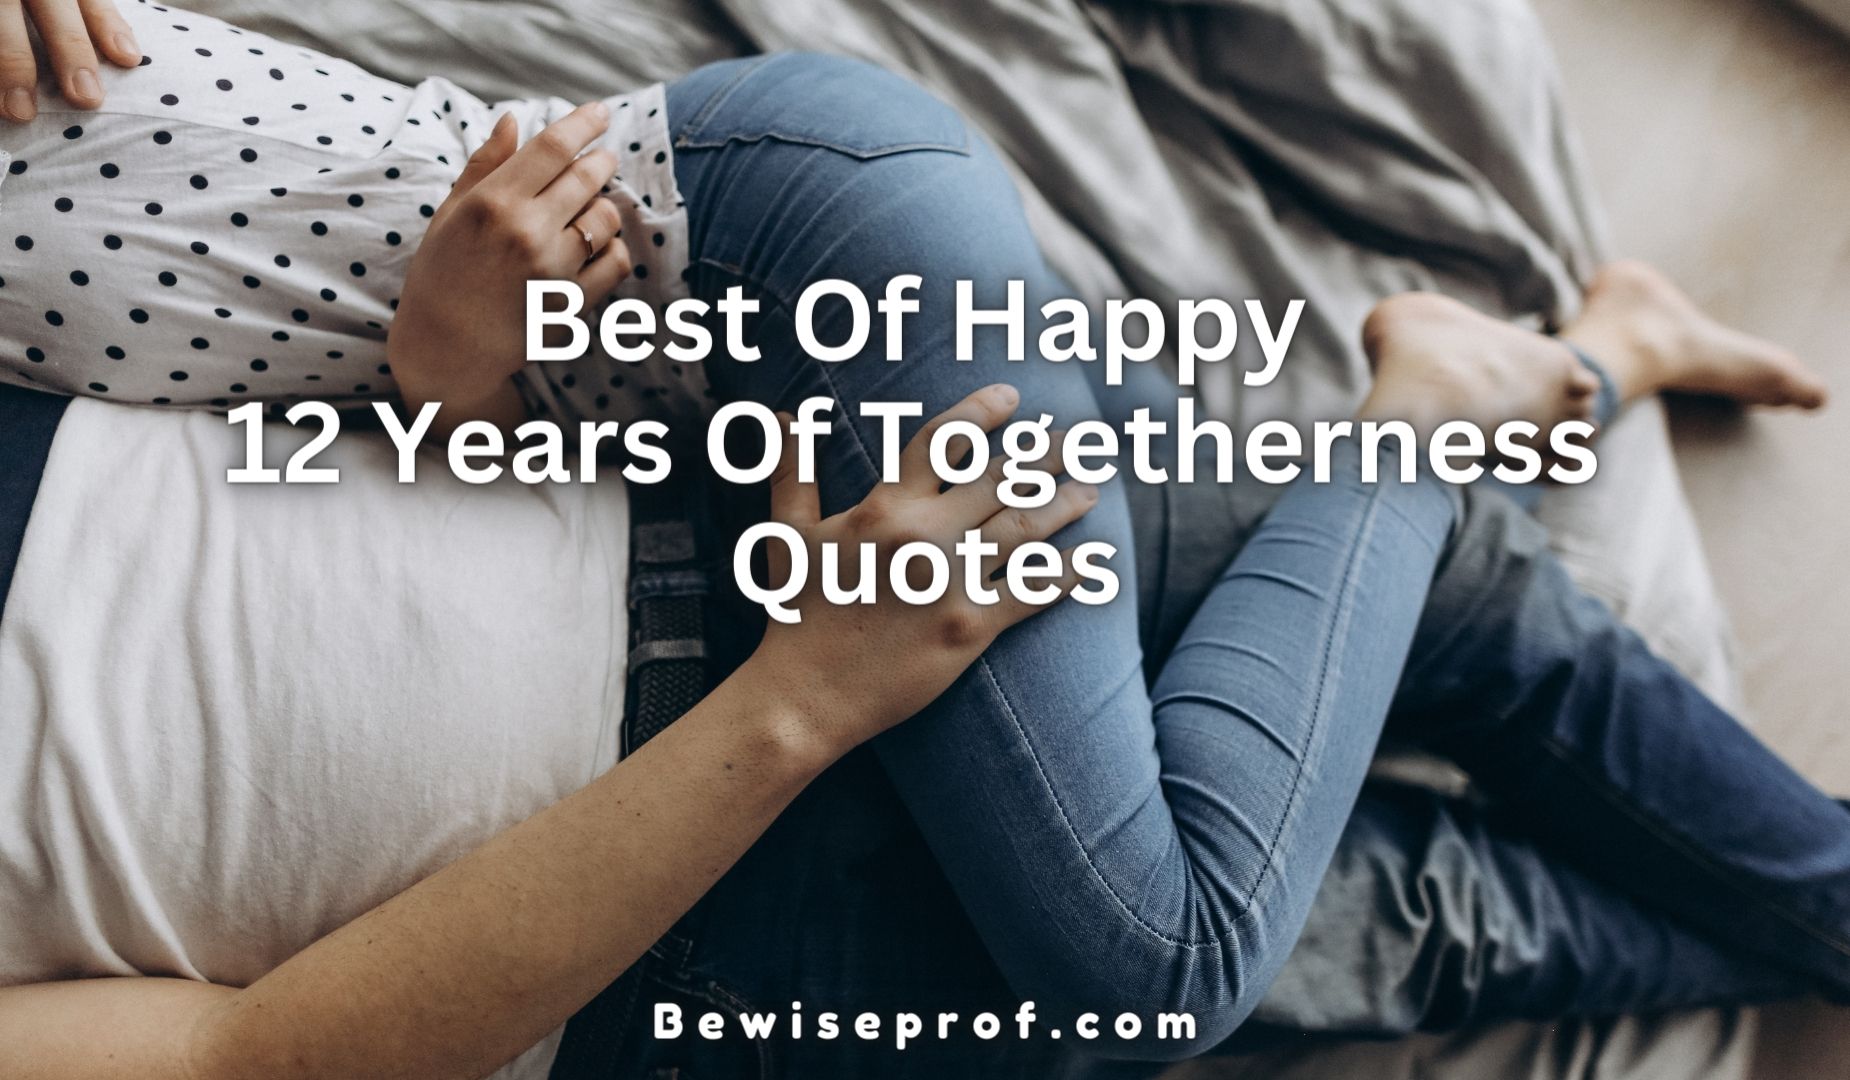 Best Of Happy 12 Years Of Togetherness Quotes